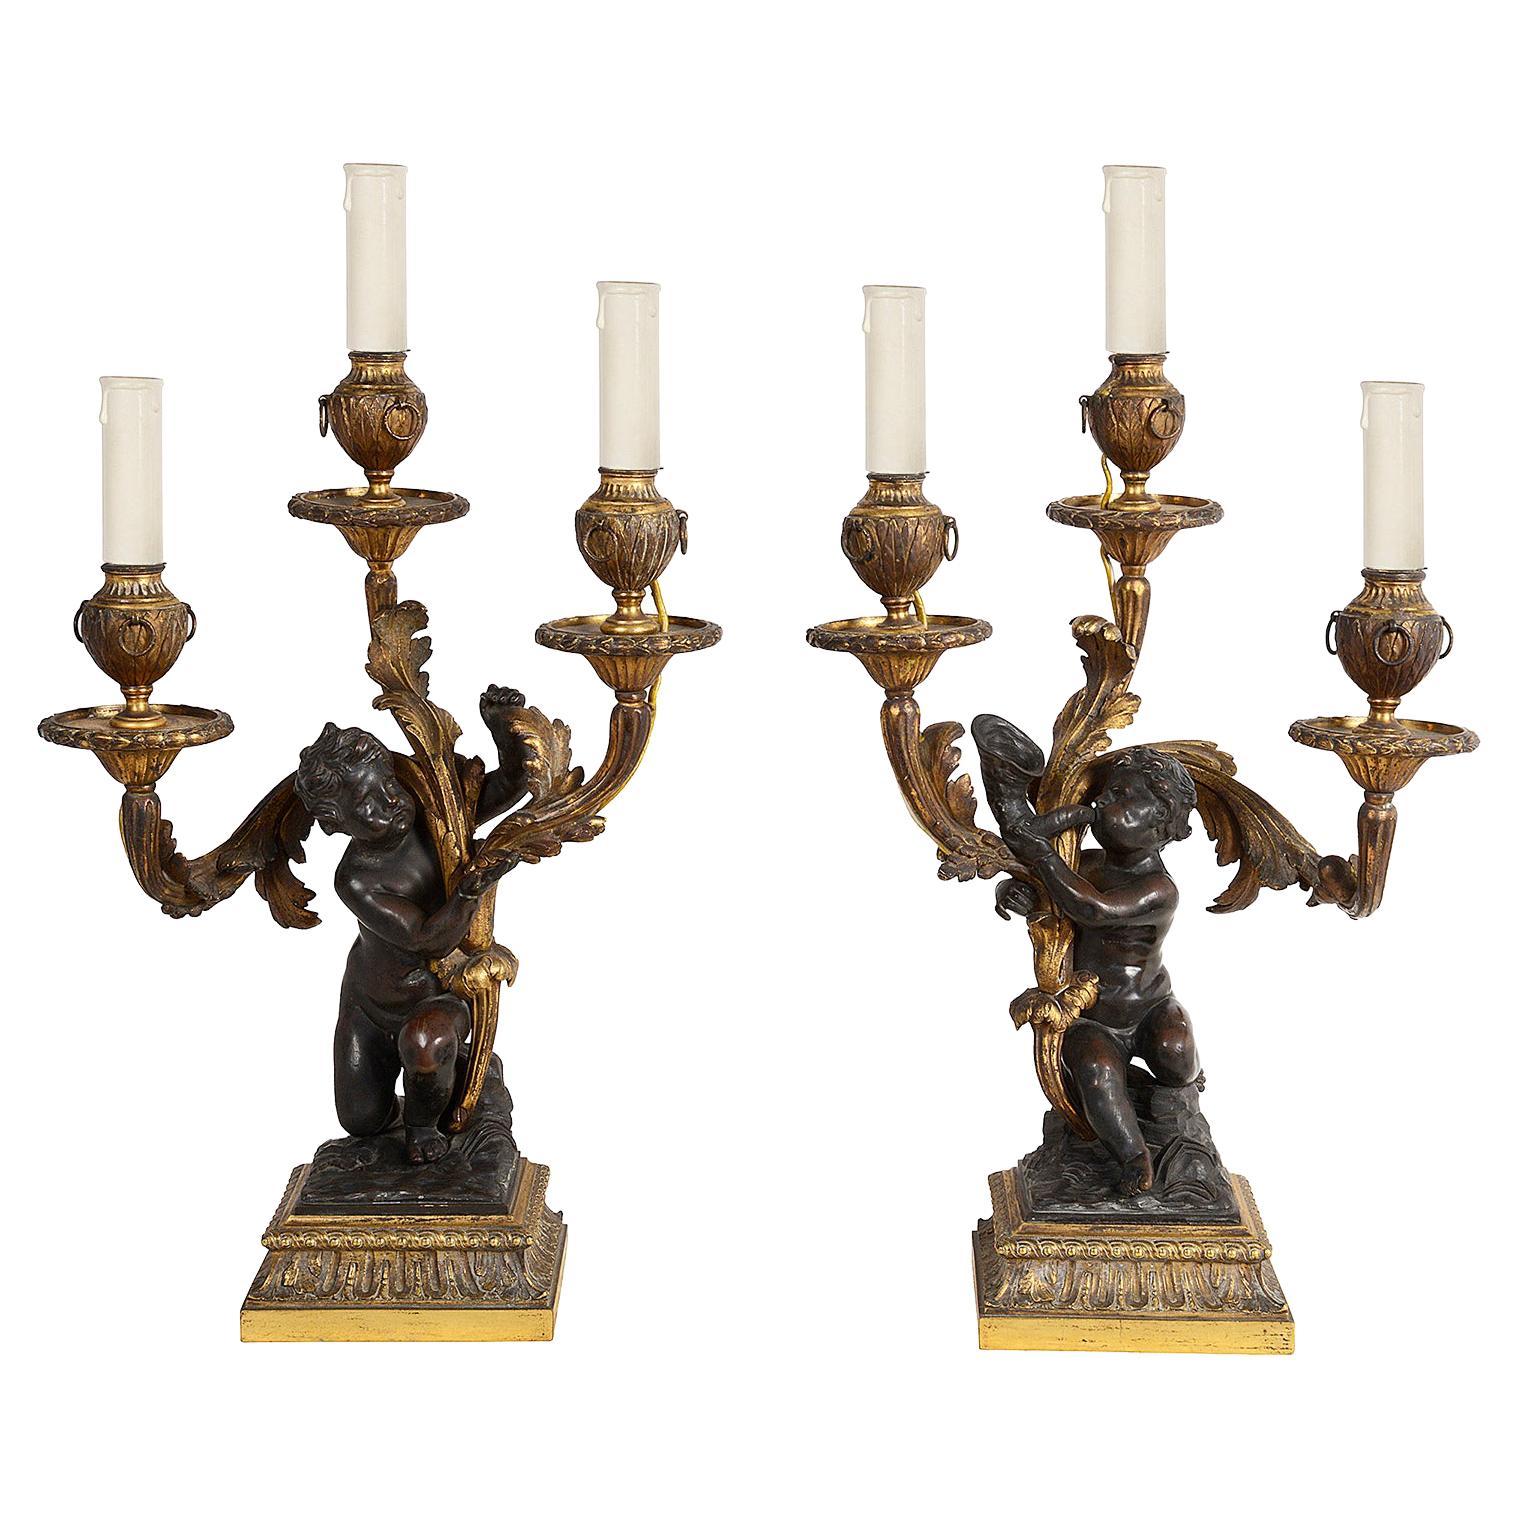 A pair of 18th century style gilded ormolu and patinated bronze three branch candelabra, each with a classical kneeling putti supporting scrolling foliate candelabra with urn like sconces and ring drop decoration, circa 1800.